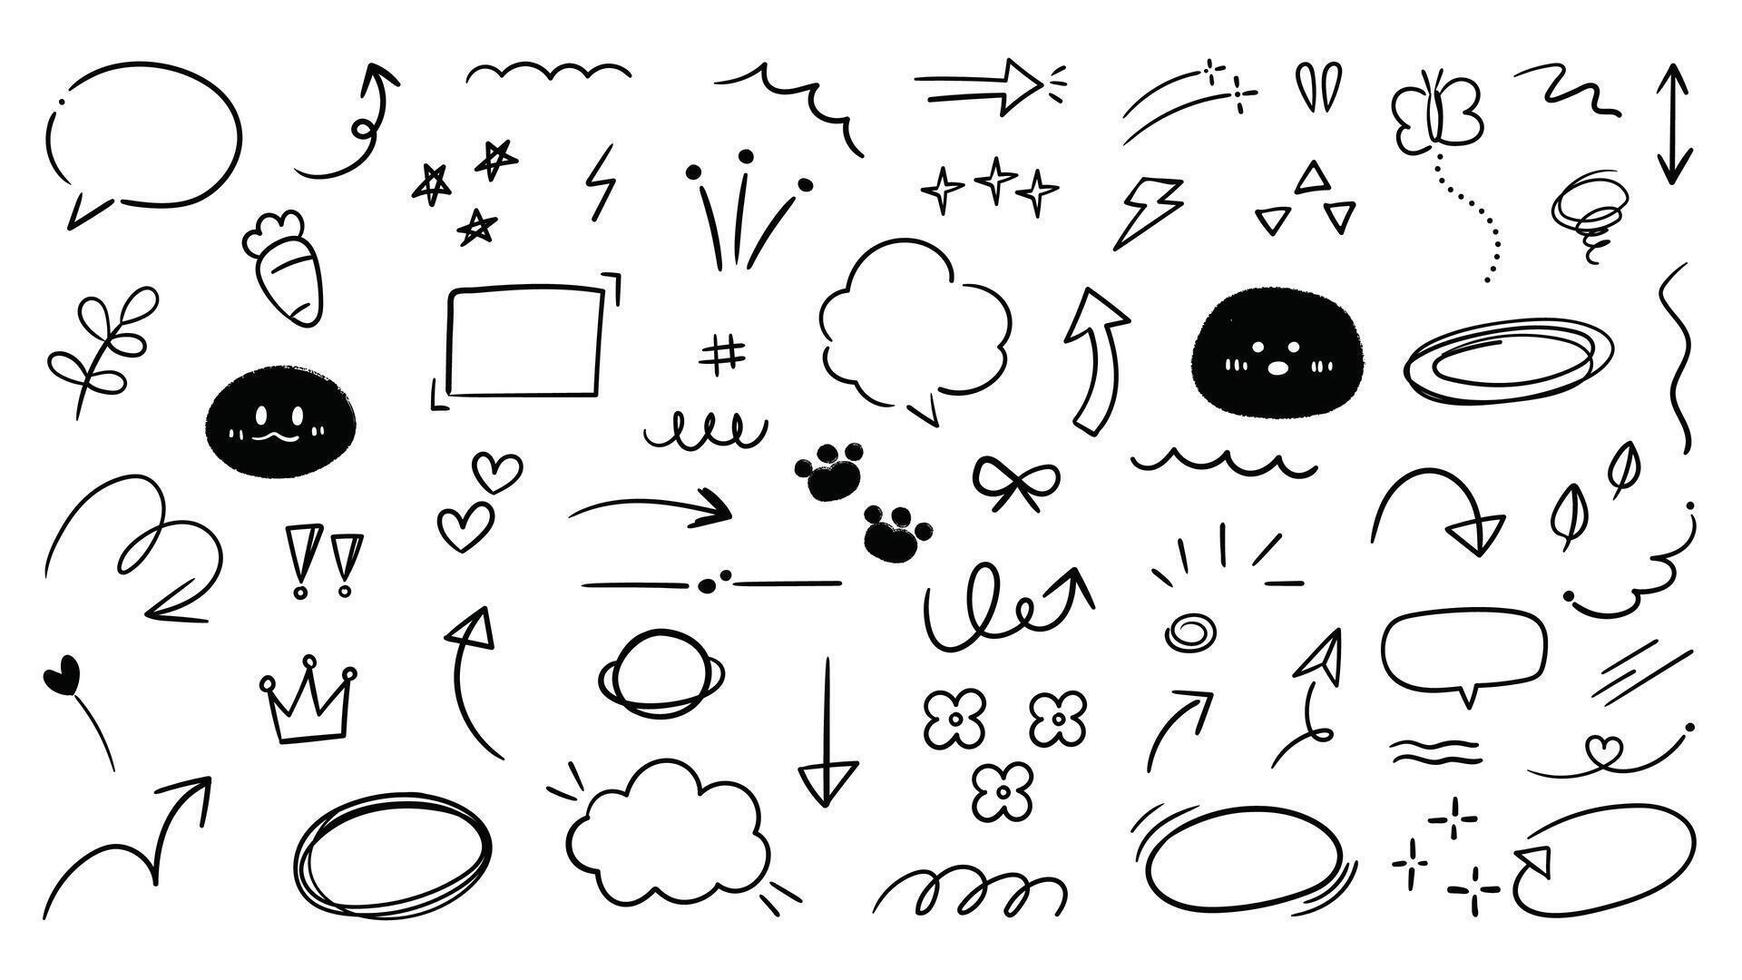 Set of cute pen line doodle element . Hand drawn doodle style collection of scribble, speech bubble, arrow, paw, carrot, flower, heart. Design for print, cartoon, card, decoration, sticker. vector